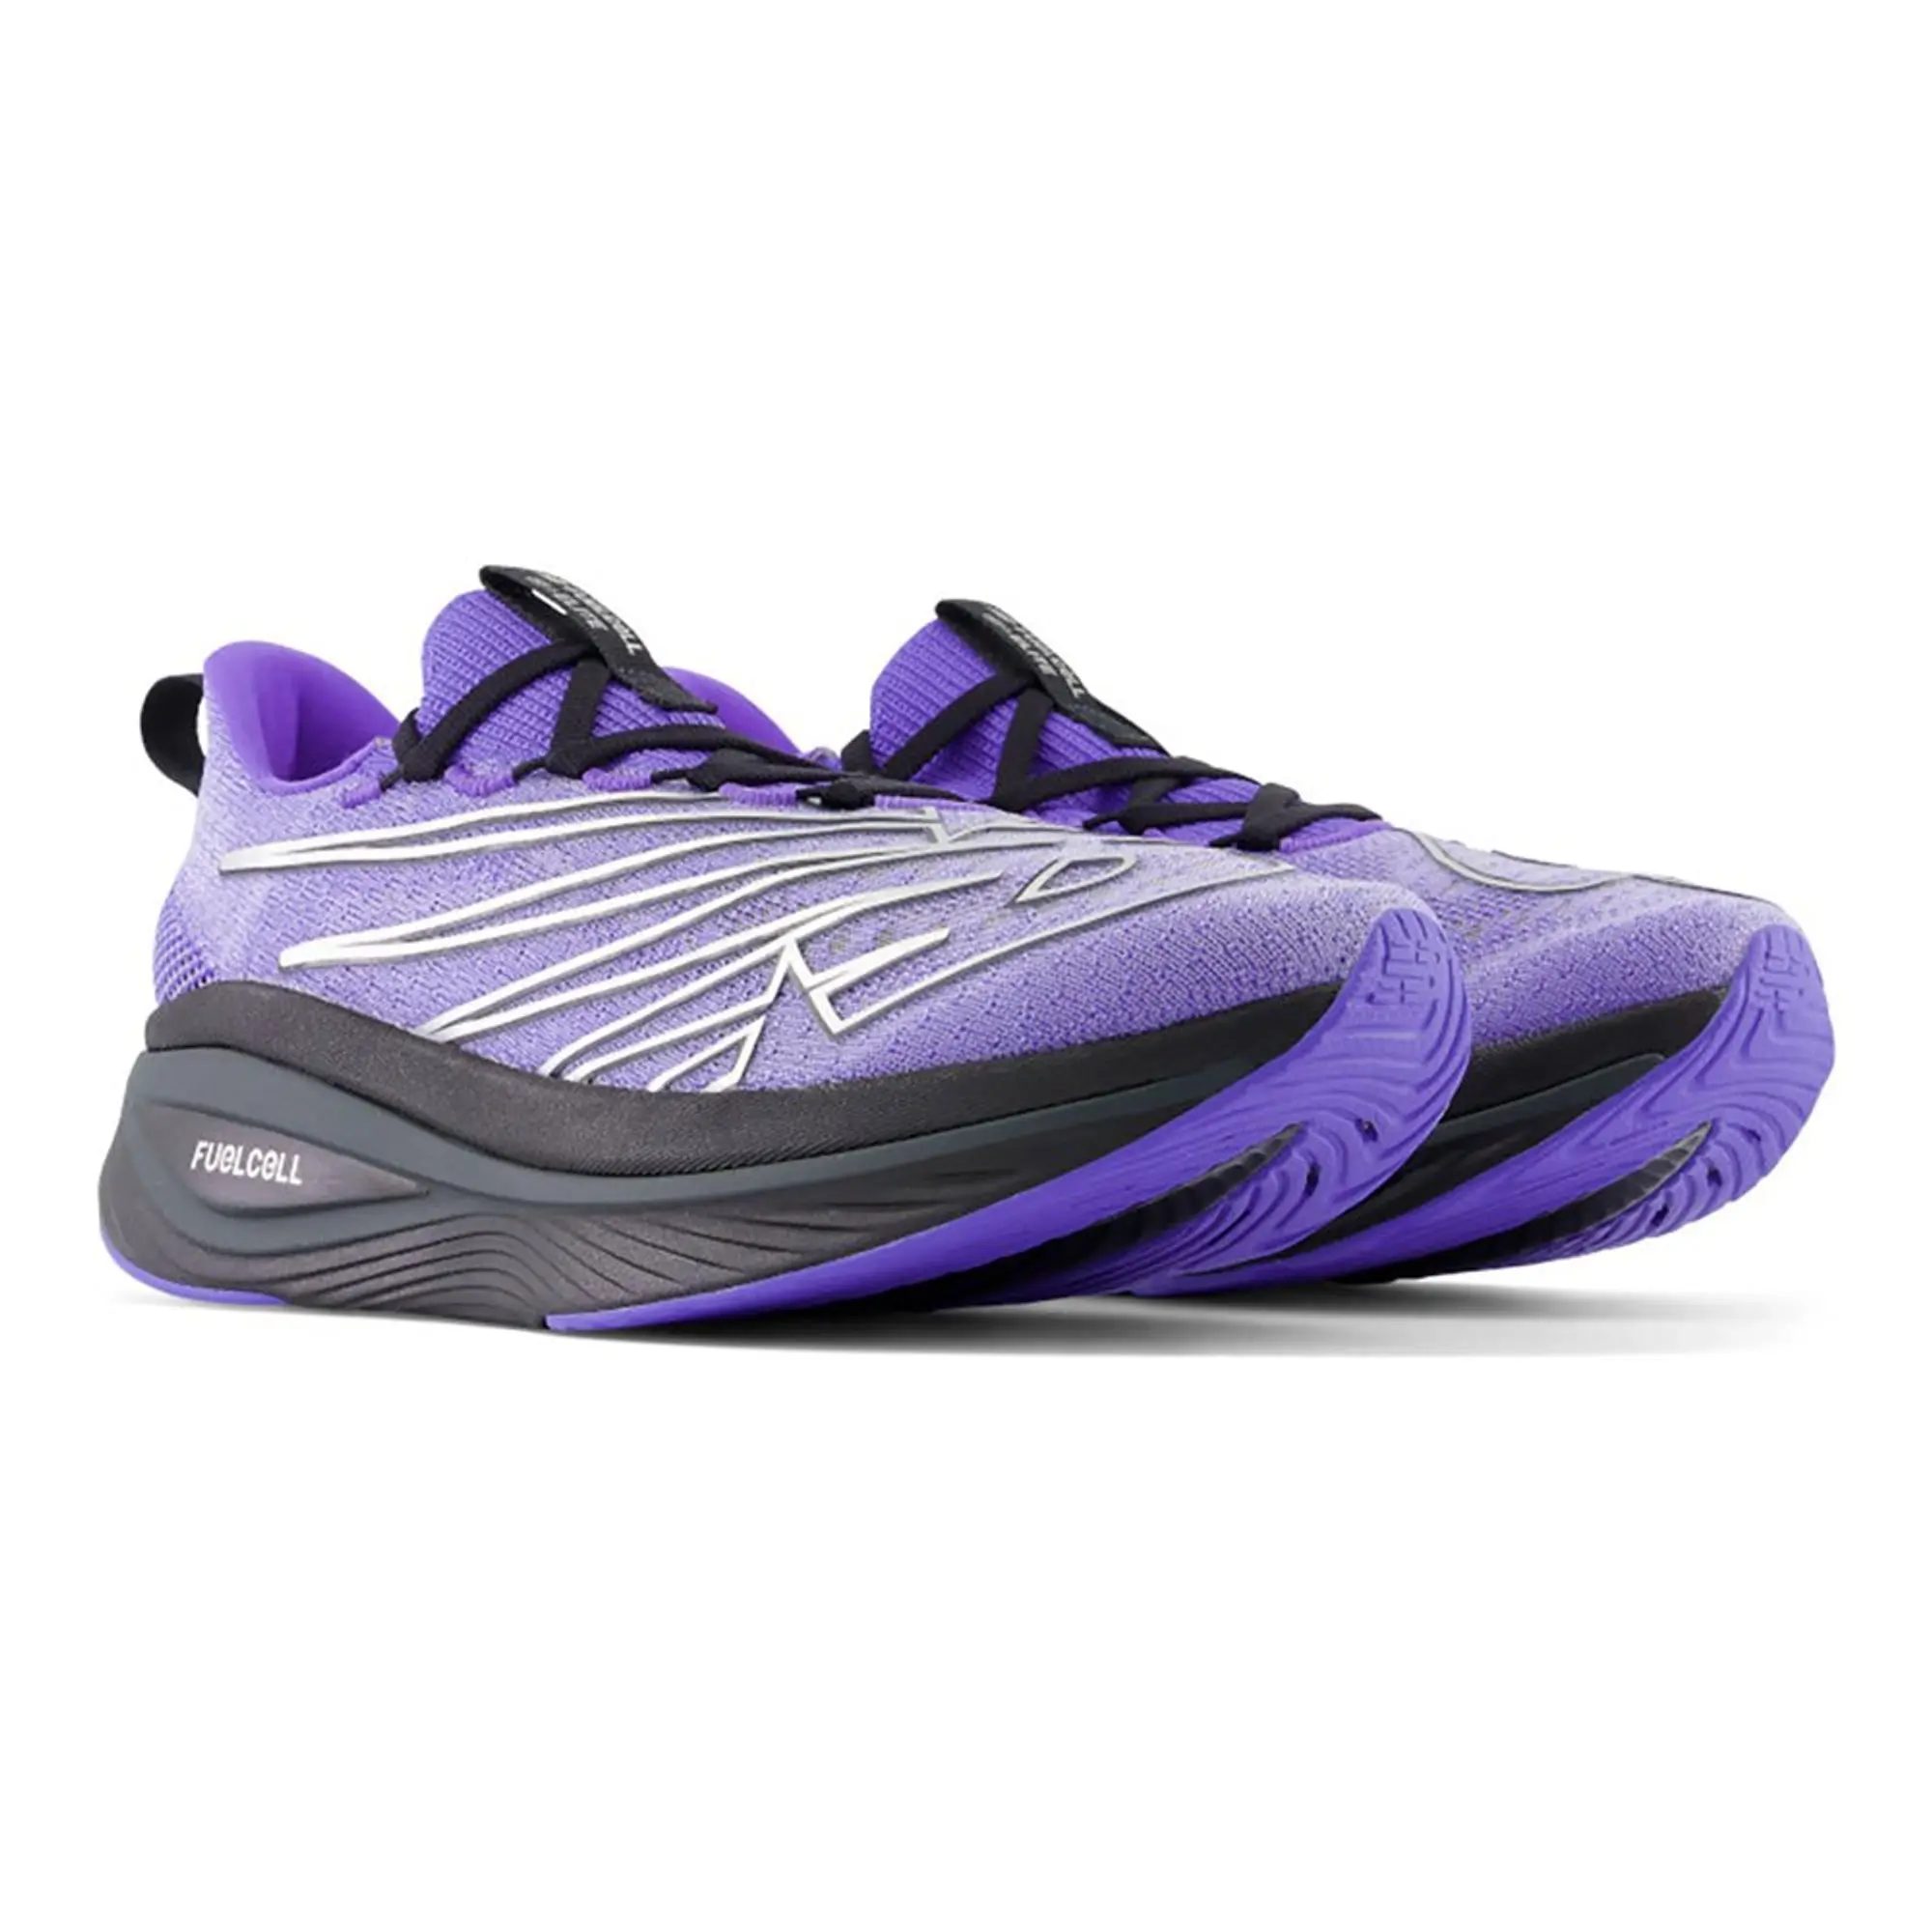 New Balance Fuelcell Supercomp Elite V3 Running Shoes  - Purple